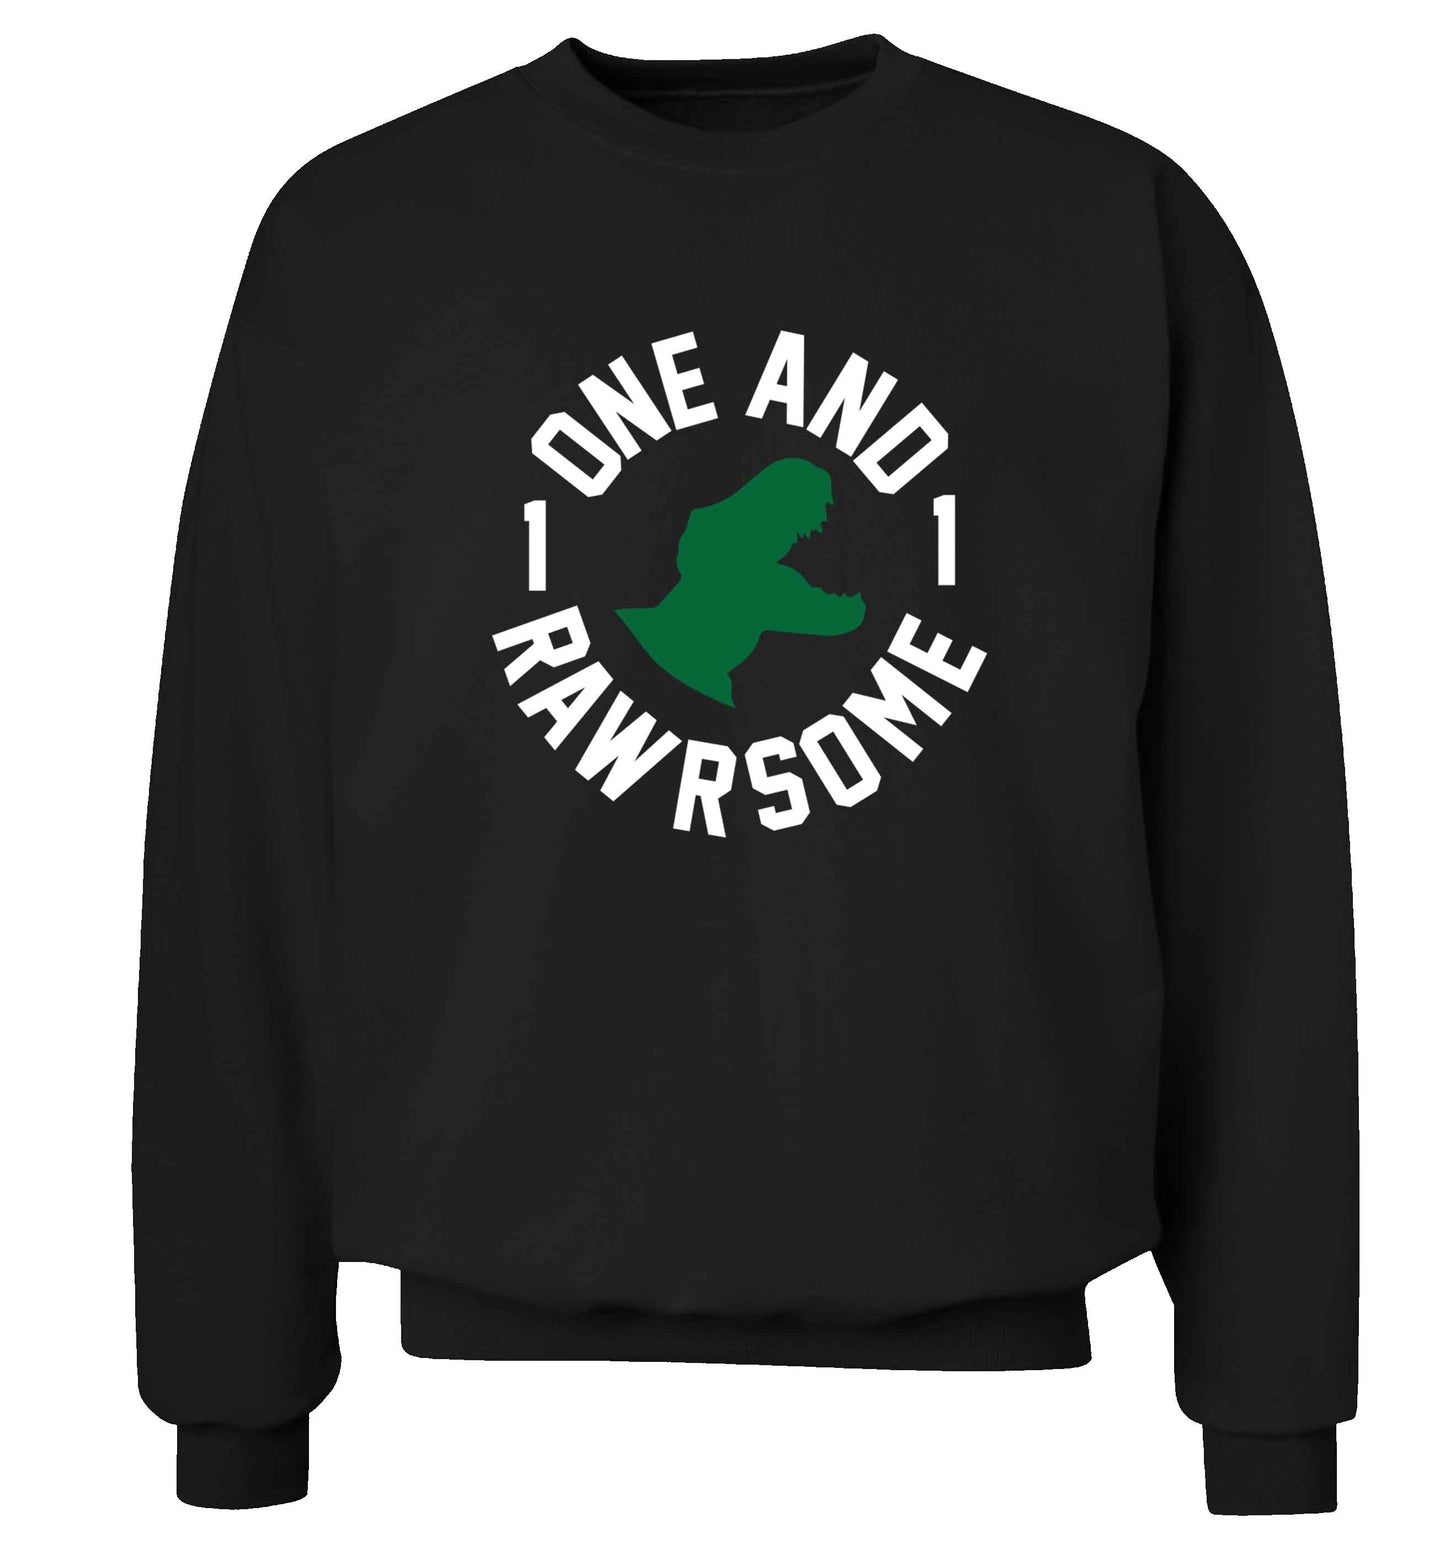 One and Rawrsome adult's unisex black sweater 2XL